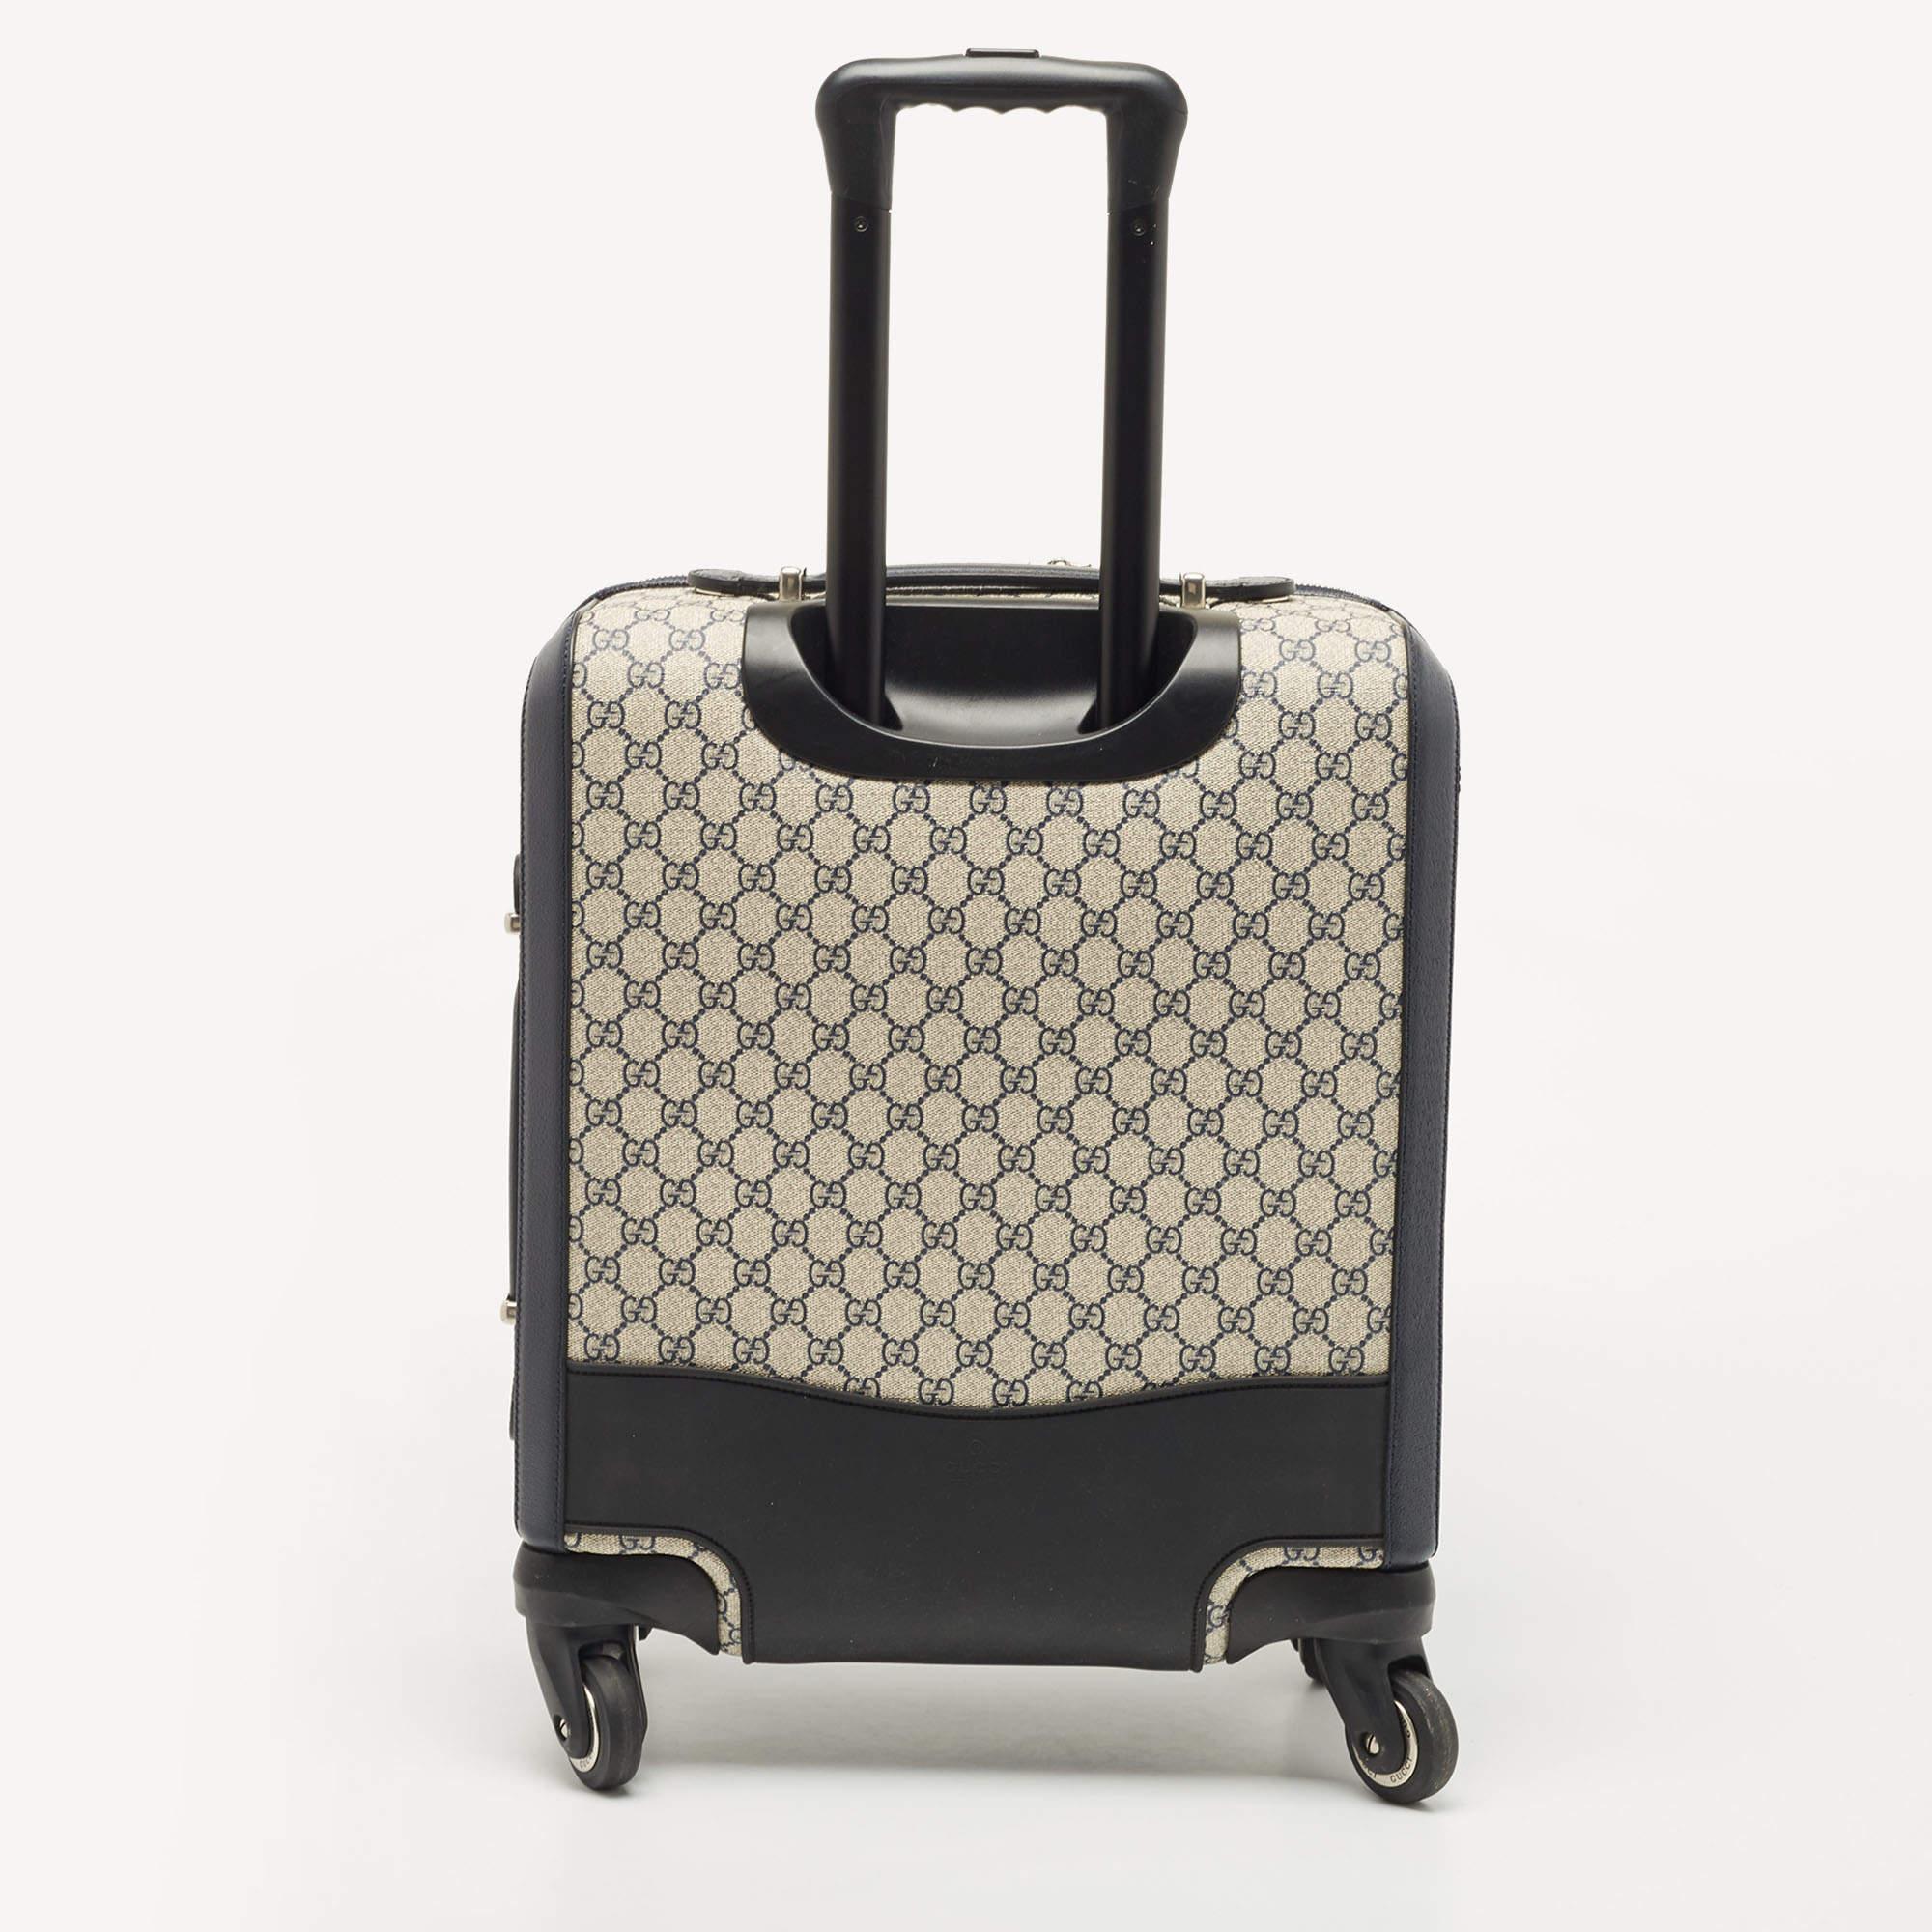 Crafted from quality materials, your wardrobe is missing out on this skillfully made designer trolley. Look your fashionable best while travelling with this practical piece.

Includes: Padlock & Keys